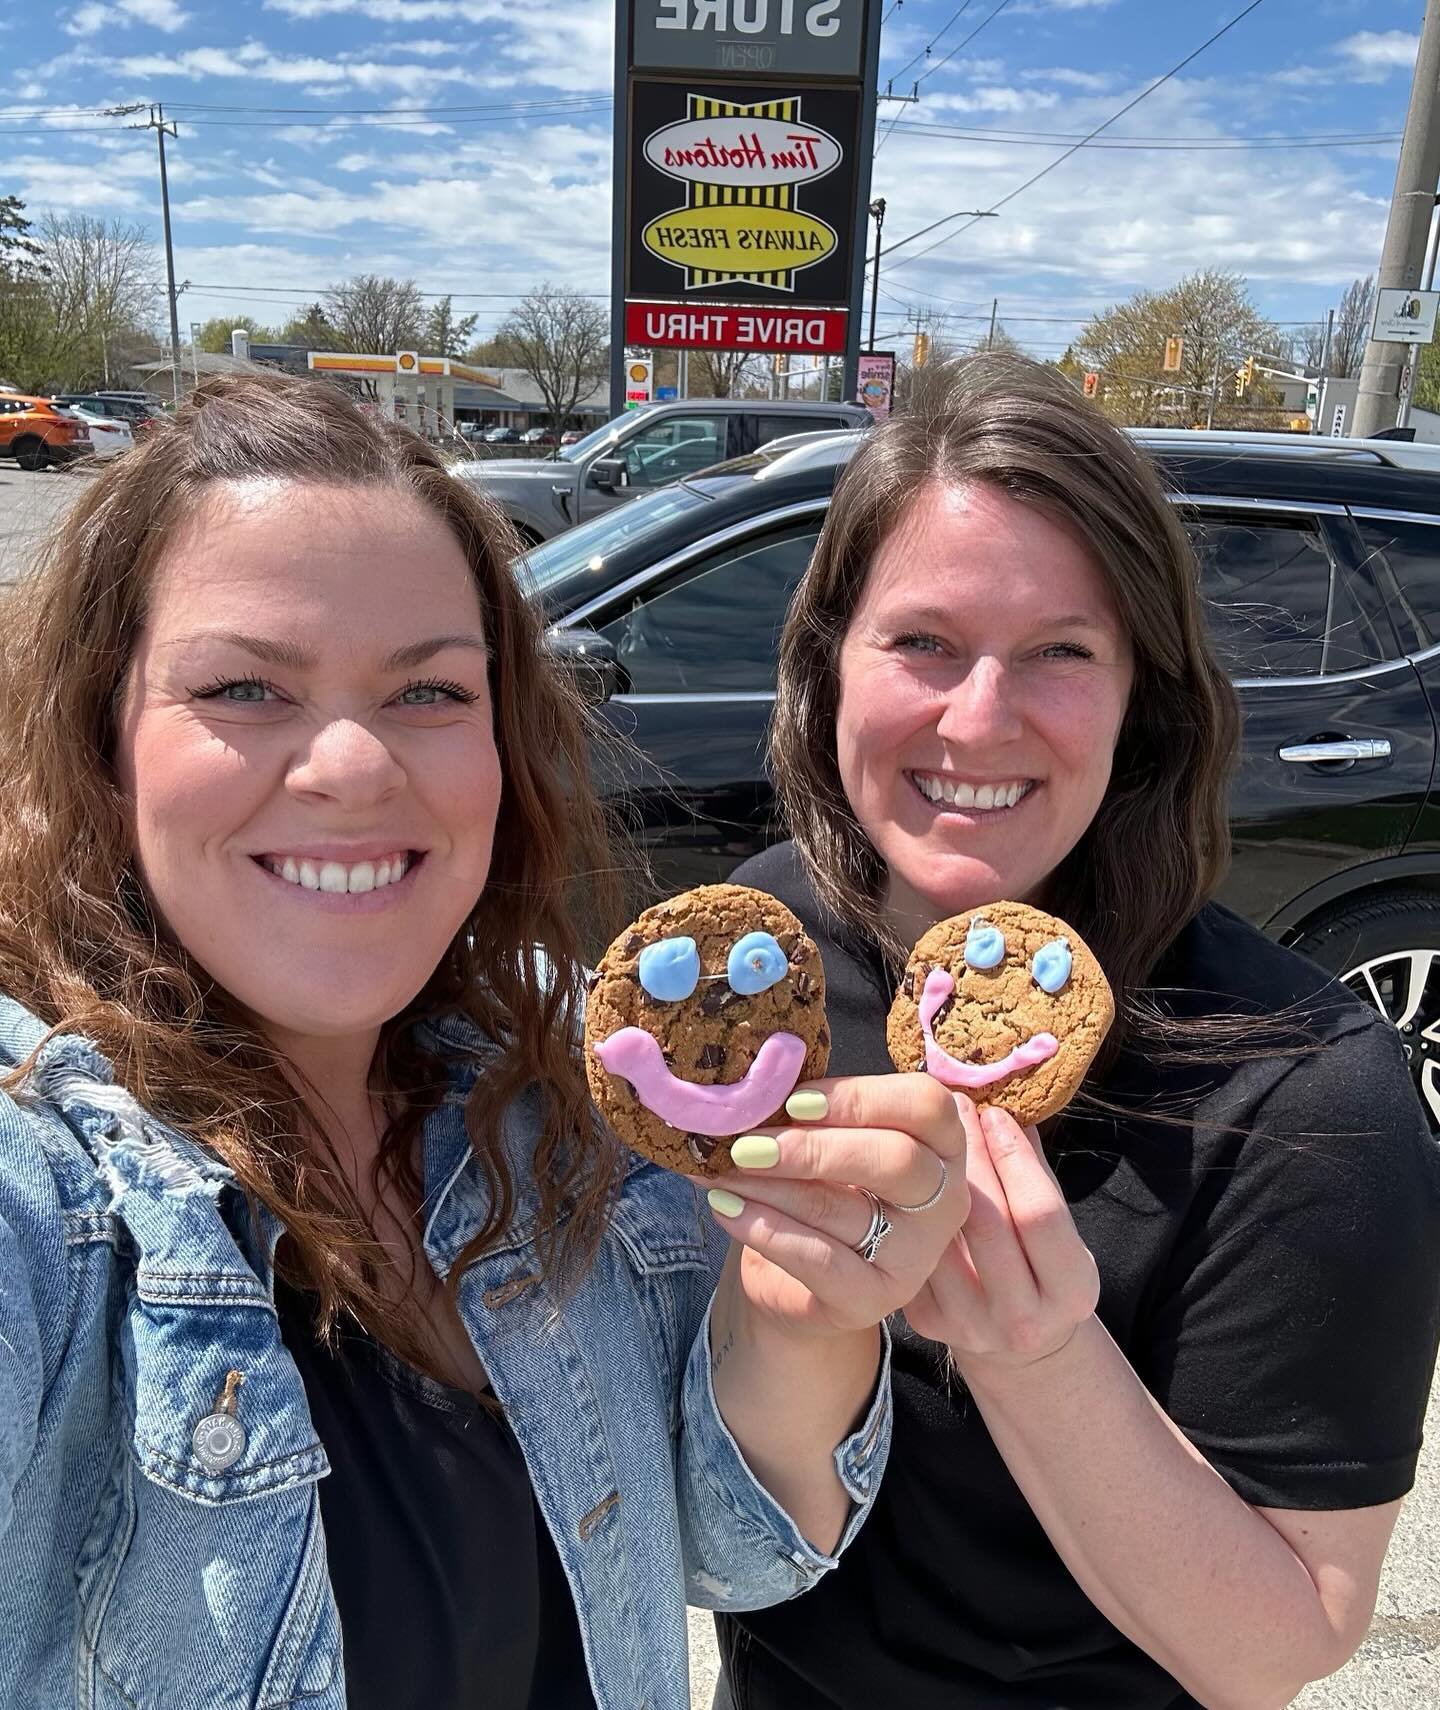 Smile Cookie day three!! 🍪💙🙌🏼

Get a Smile Cookie at any Stratford location Tim&rsquo;s &amp; 100% of the profits will go to OP ✨ a win-win 😊